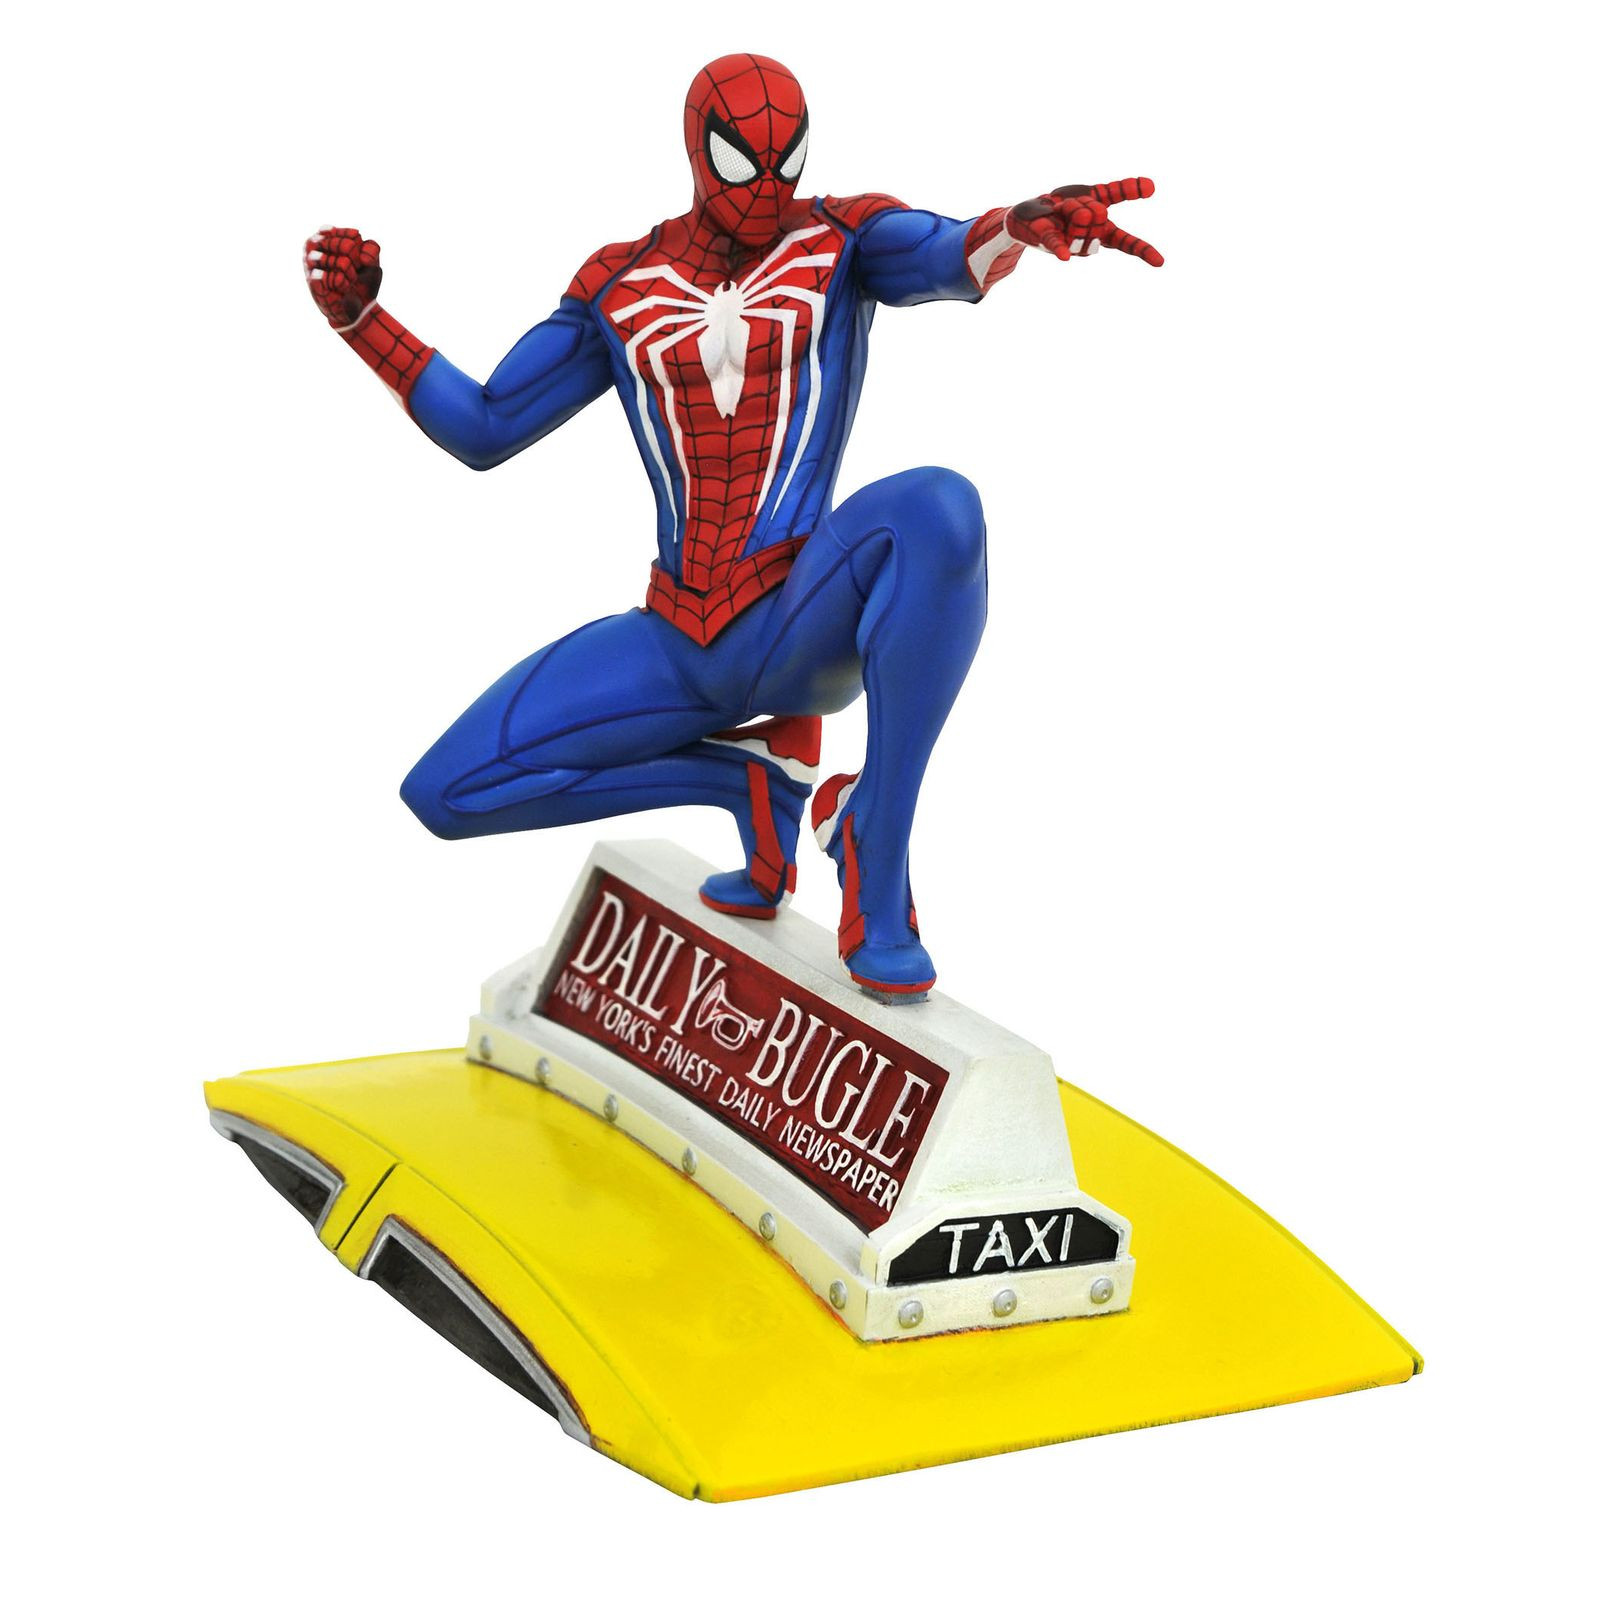 SPIDER-MAN ON TAXI PVC DIORAMA 23 CM MARVEL VIDEO GAME GALLERY (RE-RUN)